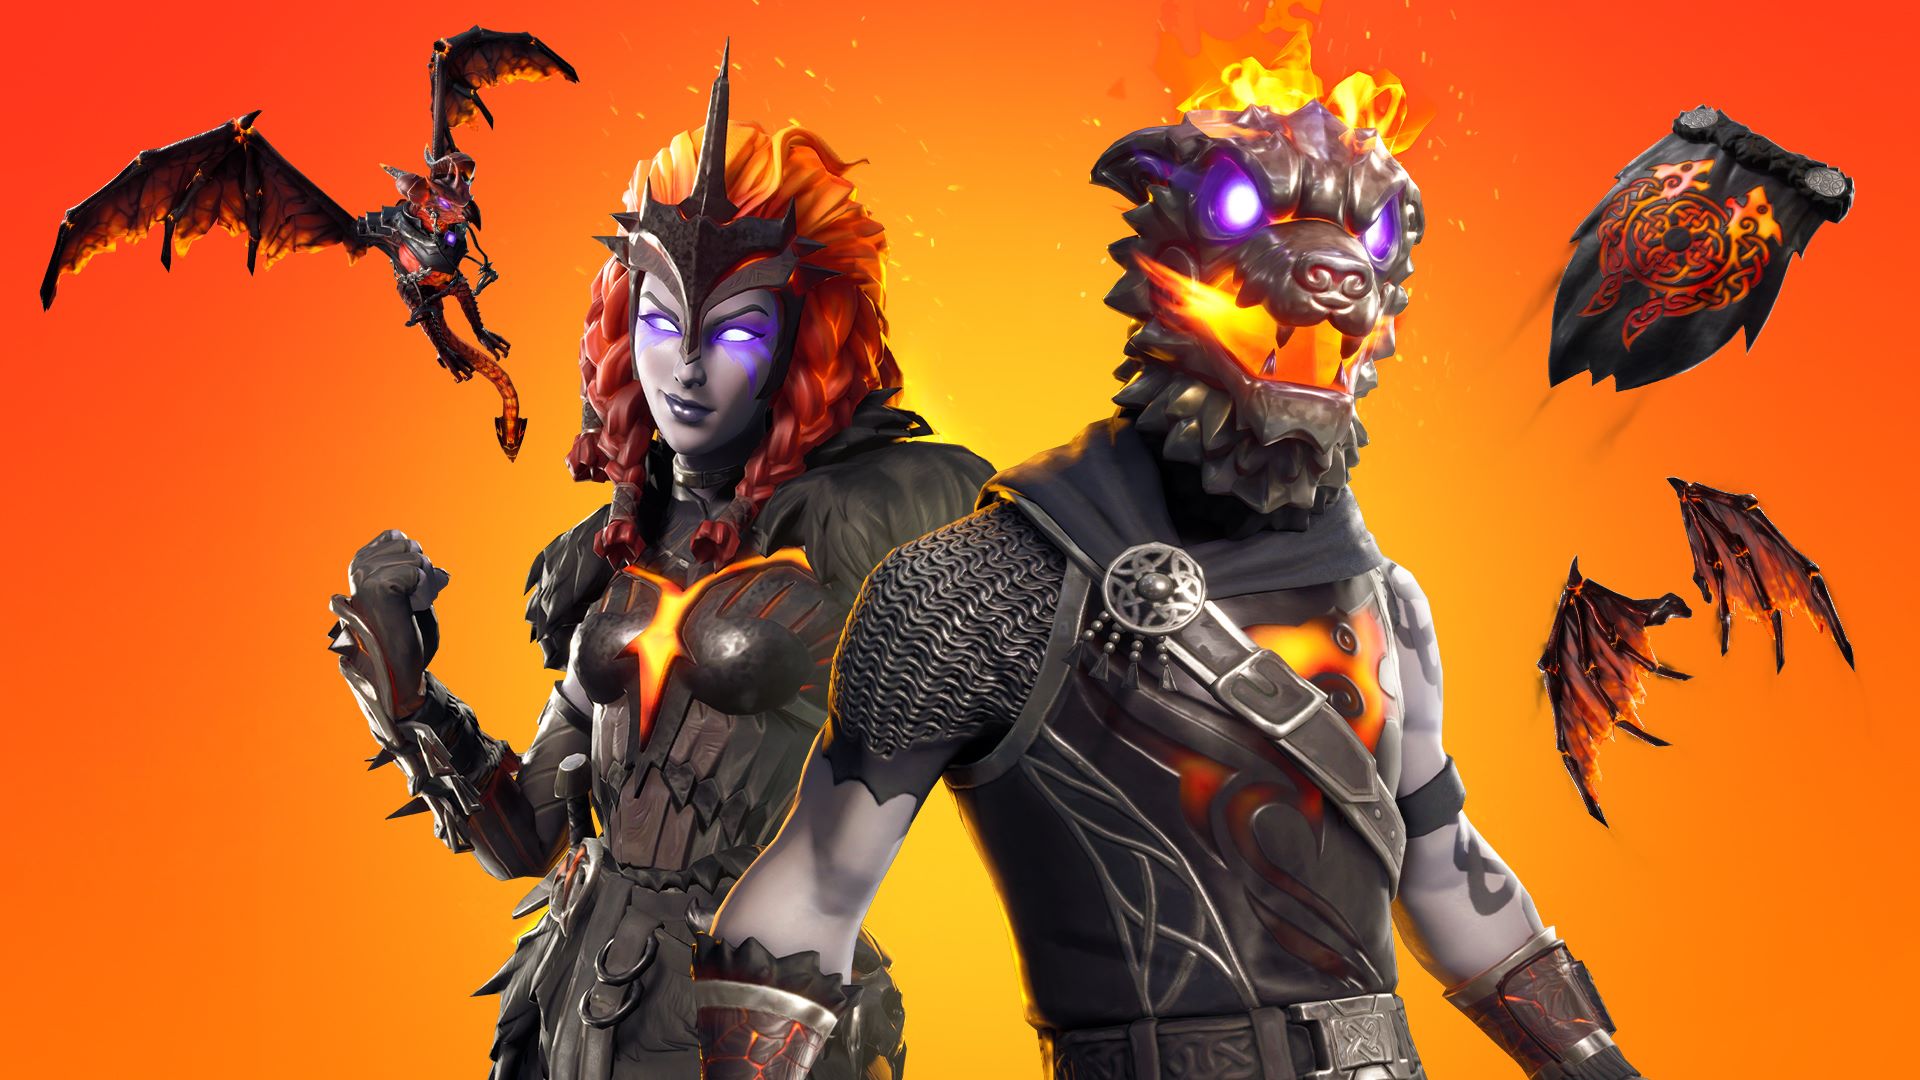 image result for fortnite season 8 week 10 challenges free challenges launch through flaming hoops - flaming hoops fortnite season 8 location